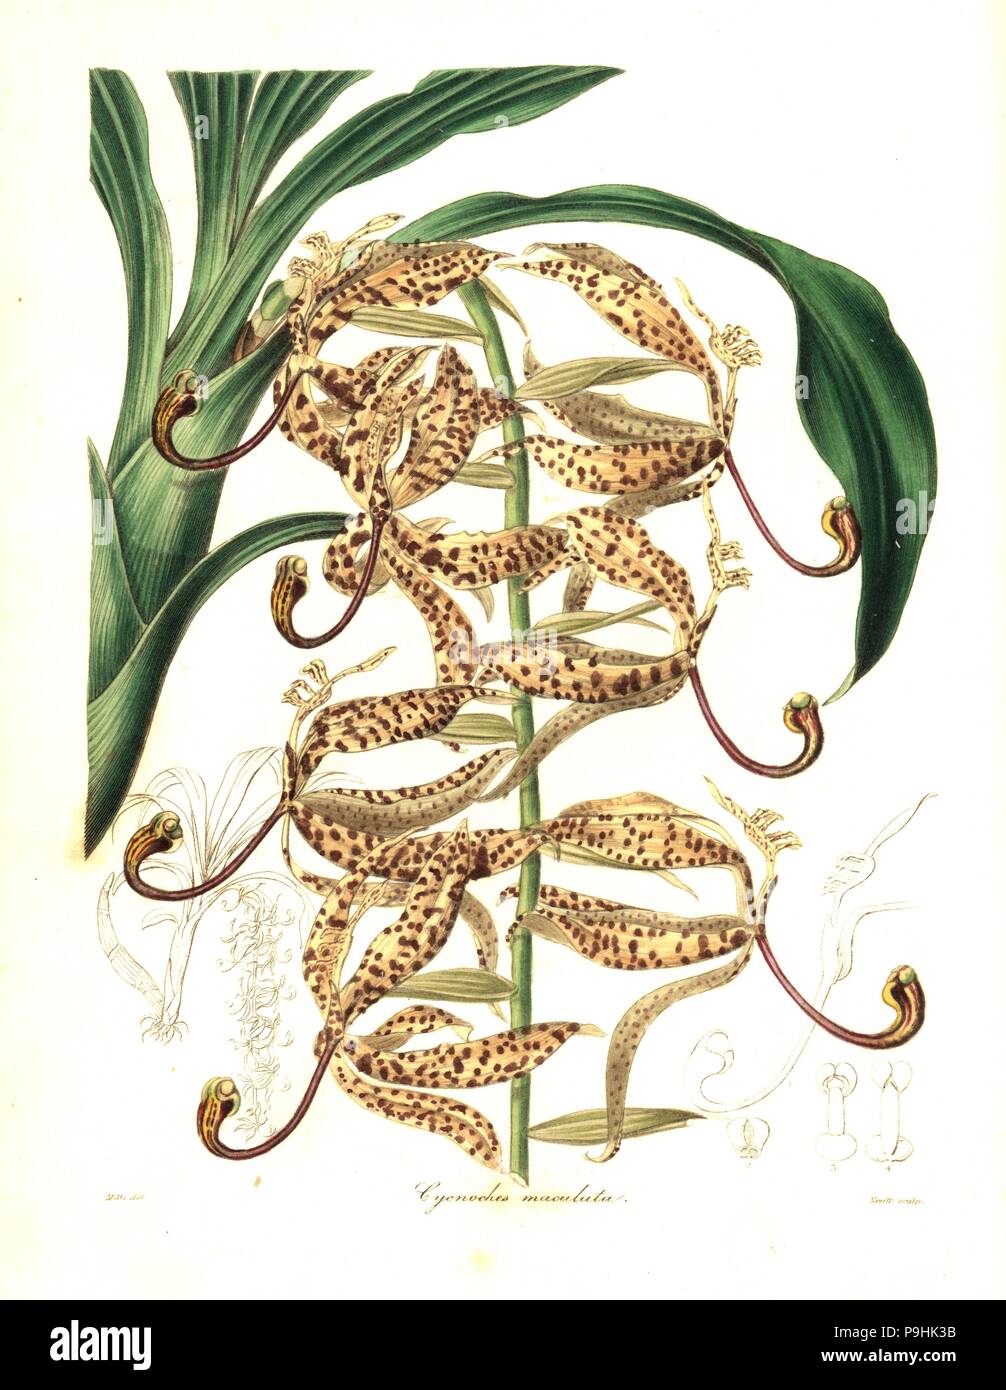 Spotted cycnoches orchid, Cycnoches maculatum. Handcoloured copperplate engraving by S. Nevitt after a botanical illustration by Mills from Benjamin Maund and the Rev. John Stevens Henslow's The Botanist, London, 1836. Stock Photo